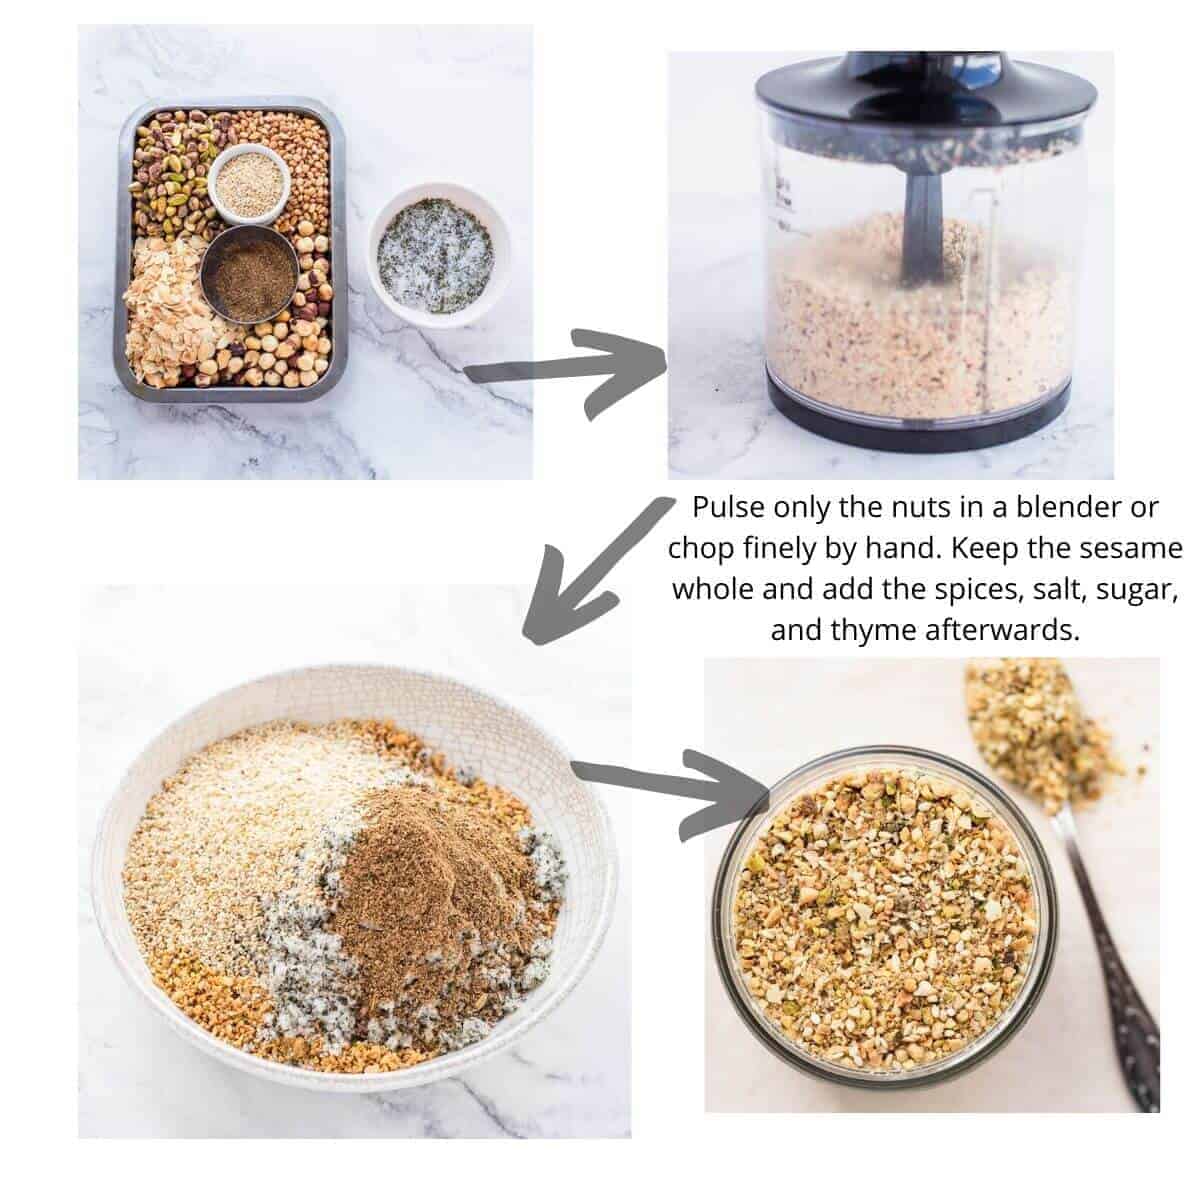 grinding nuts and putting ingredients together for dukkah